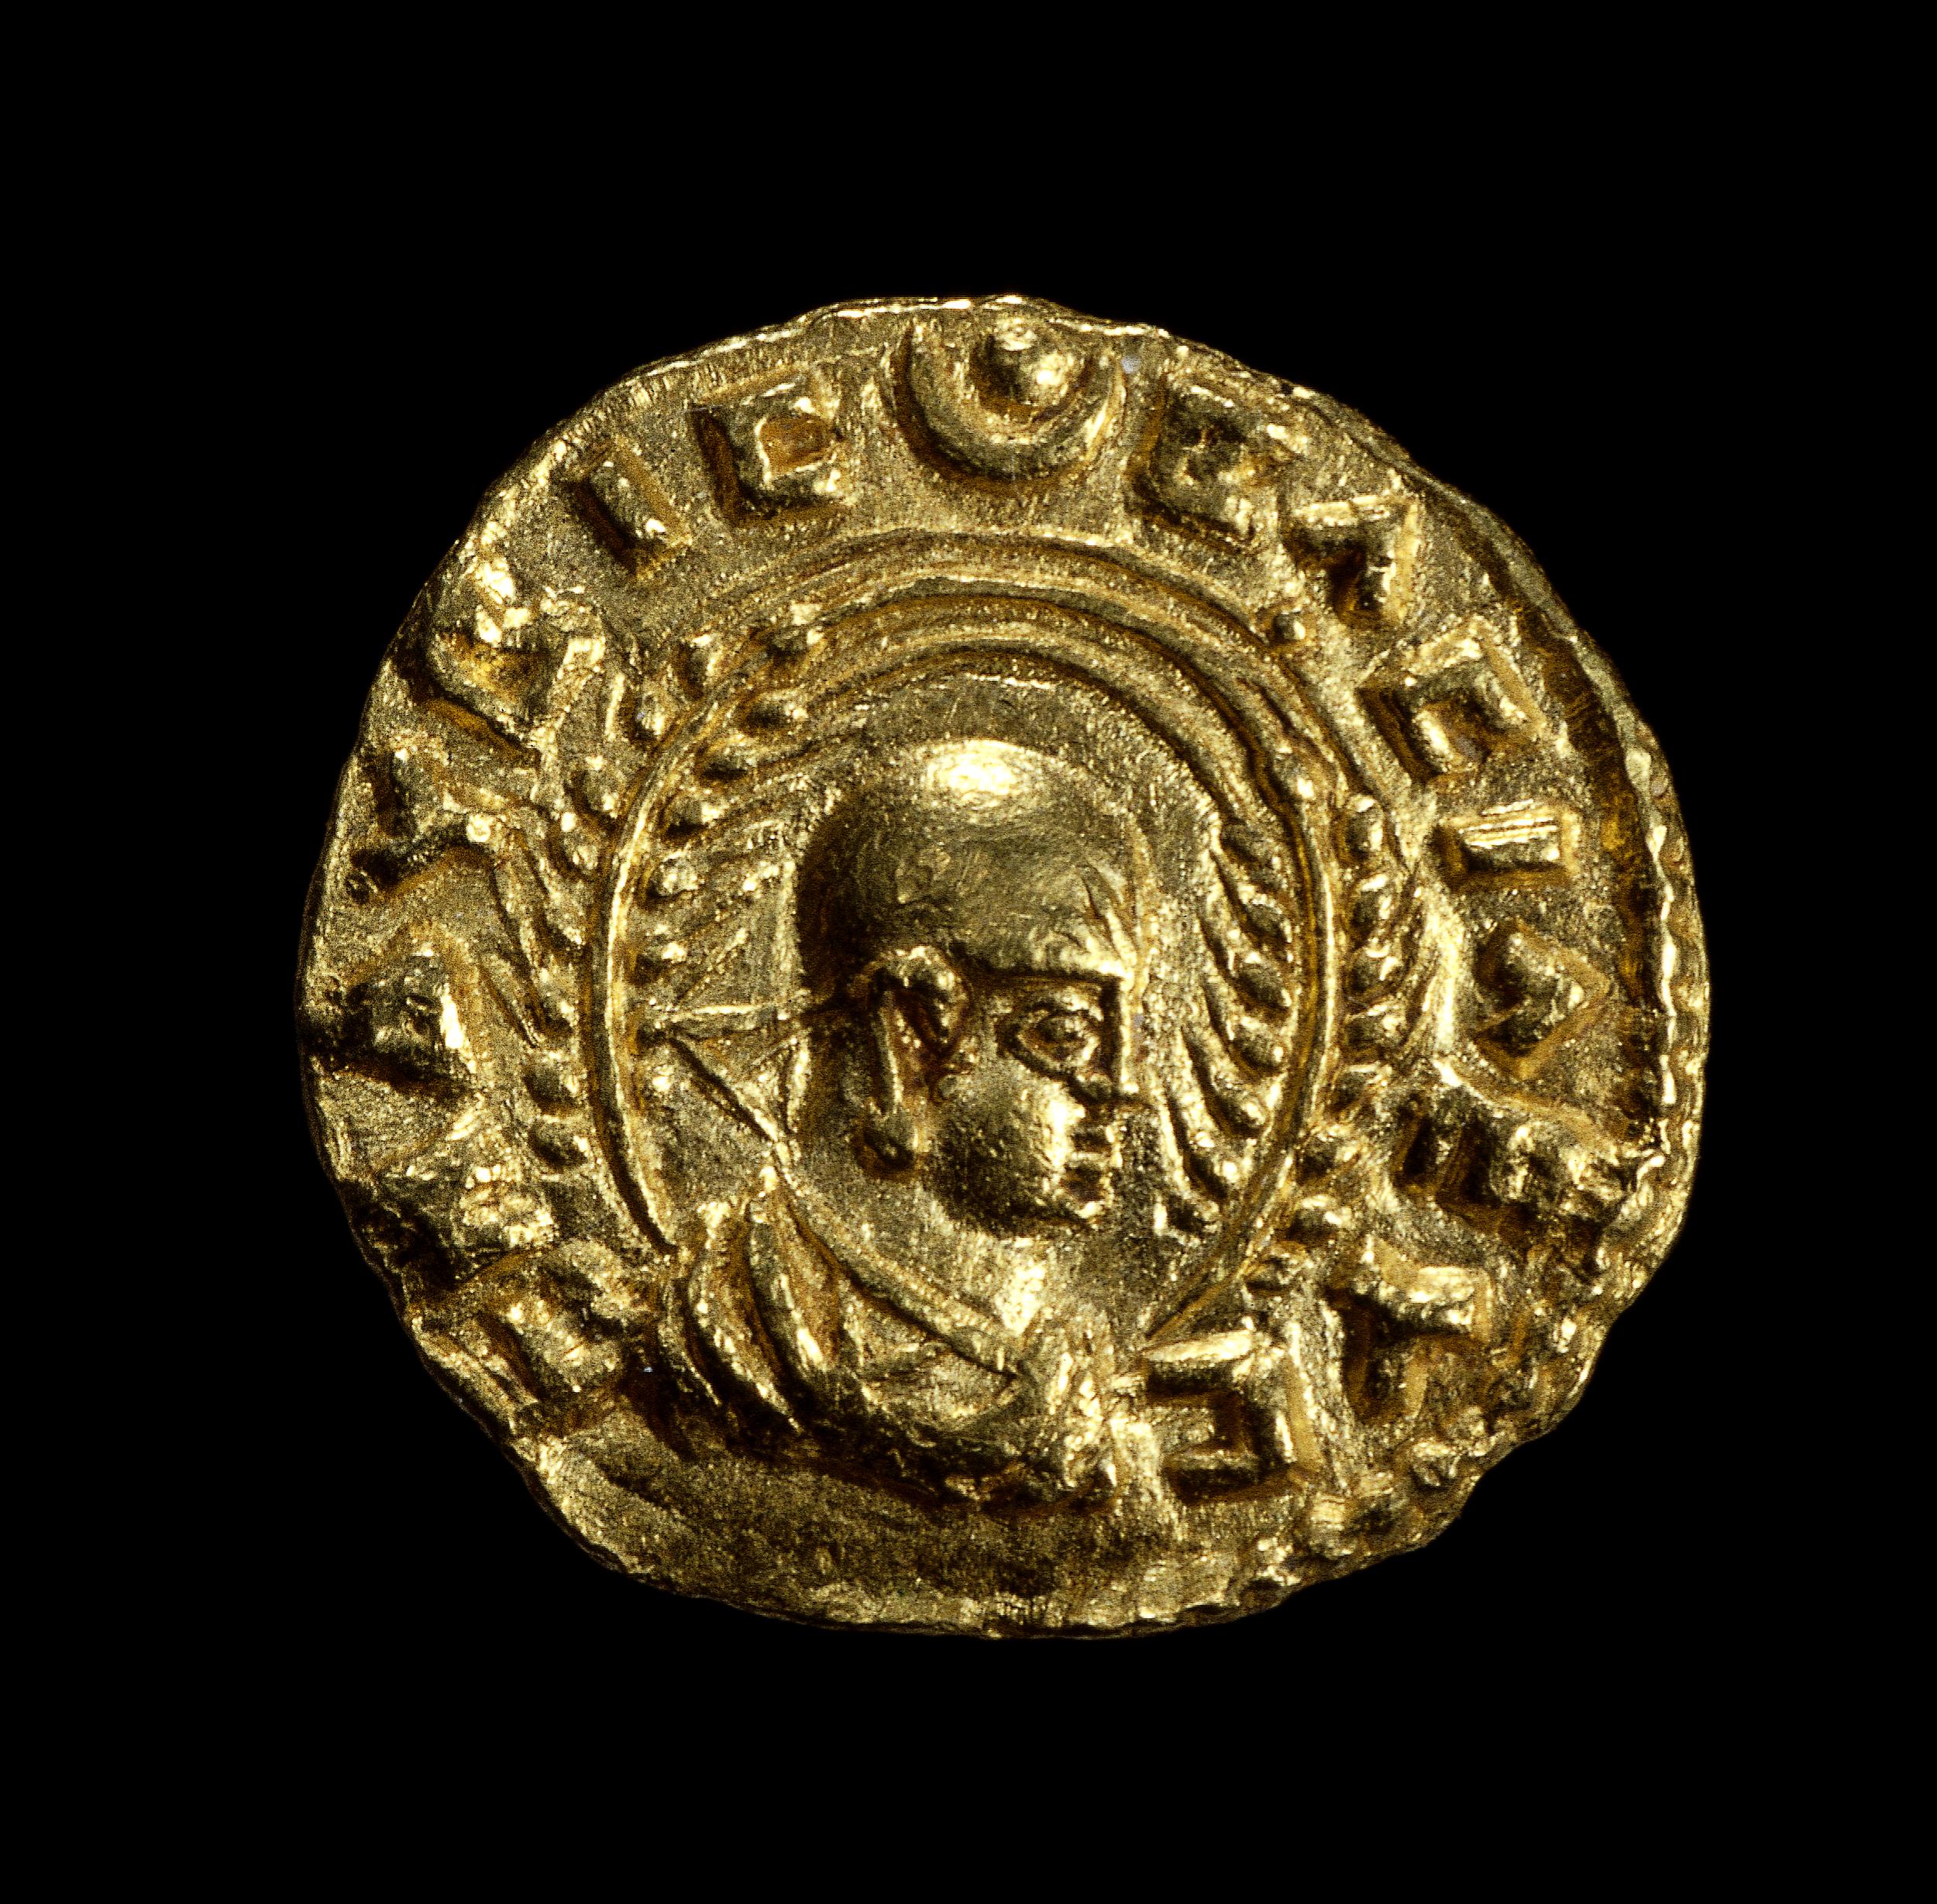 Obverse showing head and shoulders bust of King Endubis facing right, wearing headcloth with rays at forehead and triangular ribbon behind, framed by two wheat-stalks. Disc and crescent at top. Gold coin, c. 270–300 C.E., gold, minted in Aksum, modern Ethiopia (© Trustees of the British Museum)